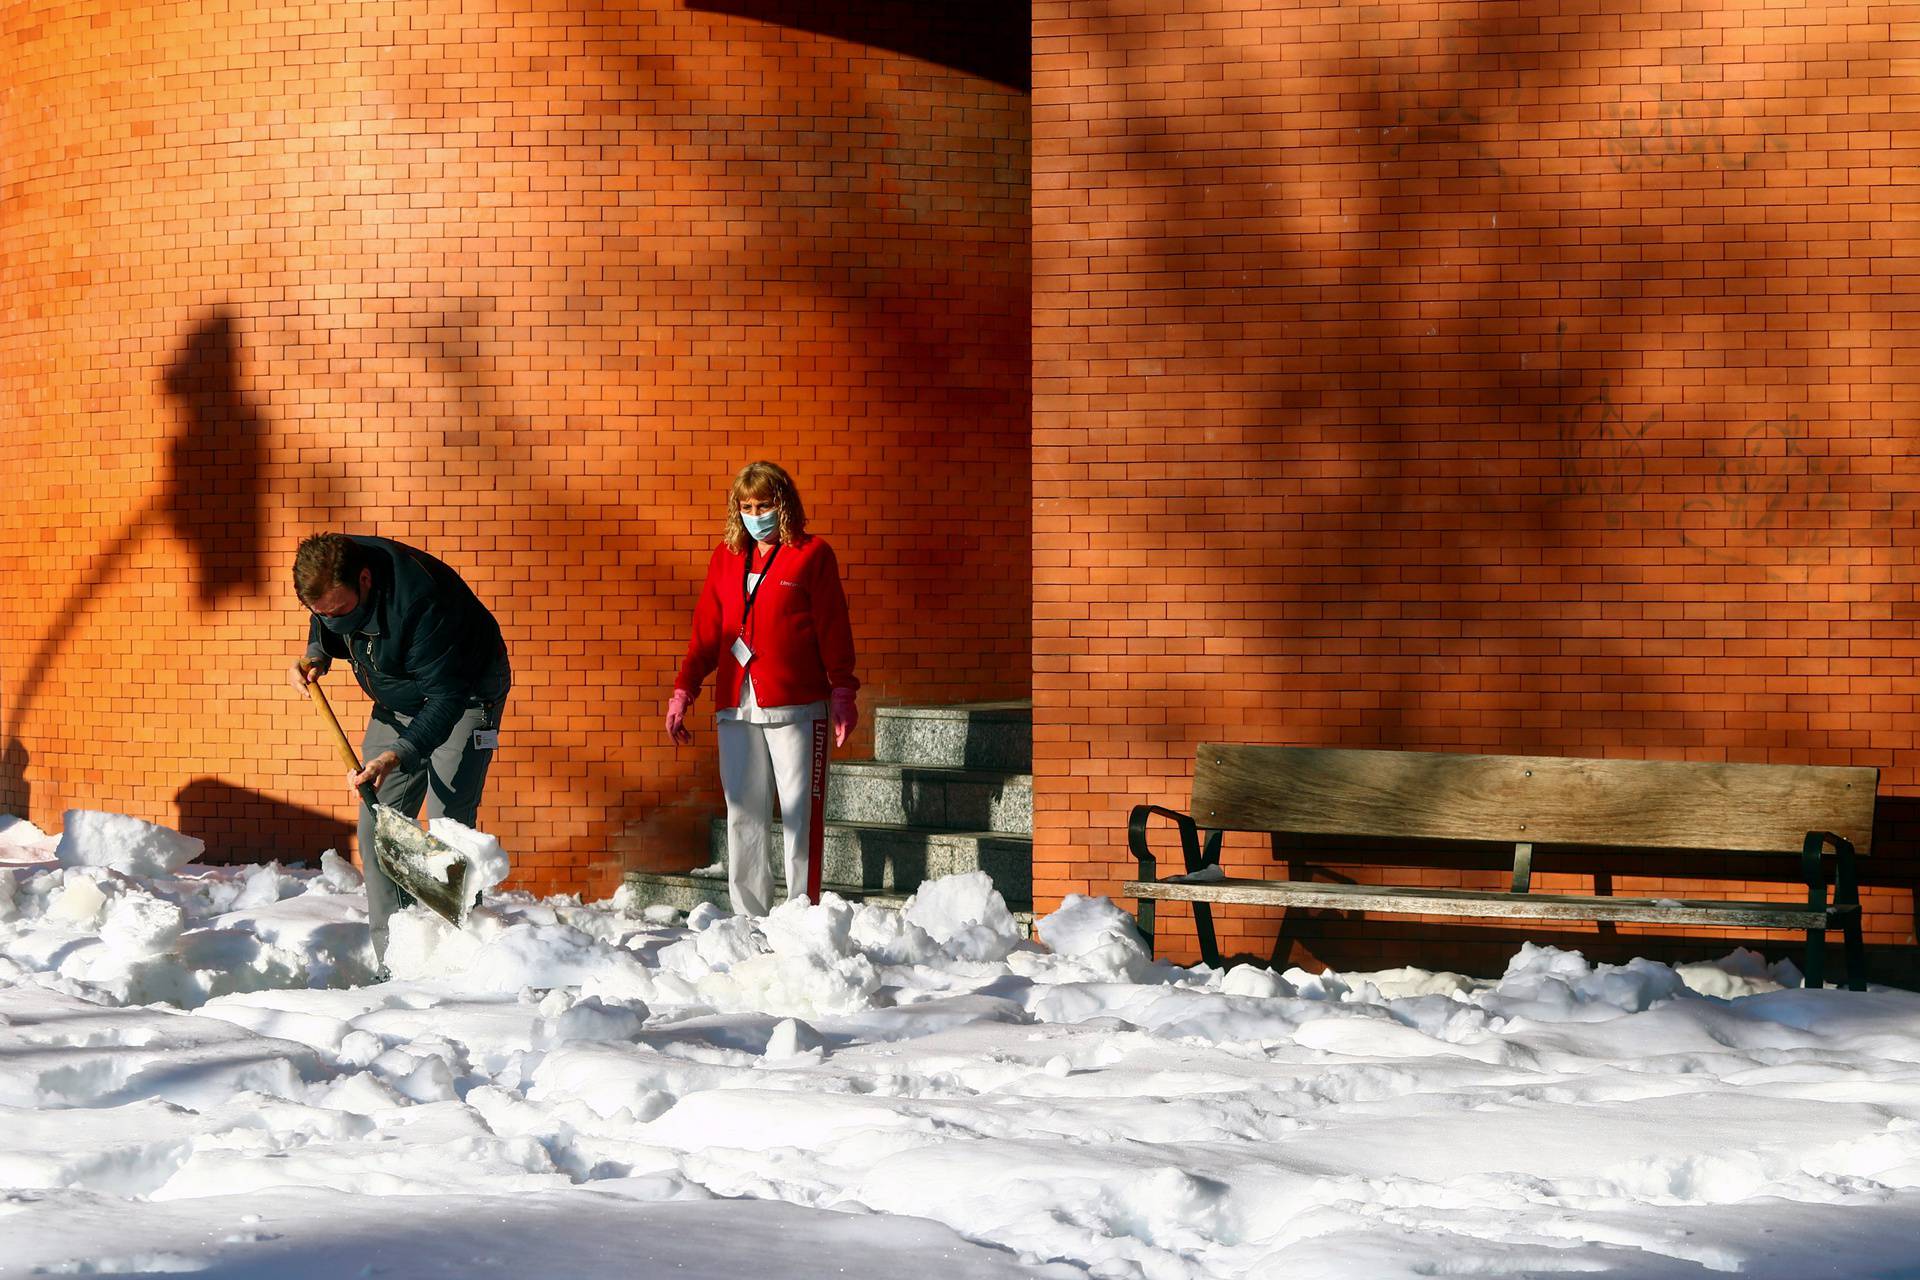 A worker shovels snow from the entrance of a building after heavy snowfall in Madrid